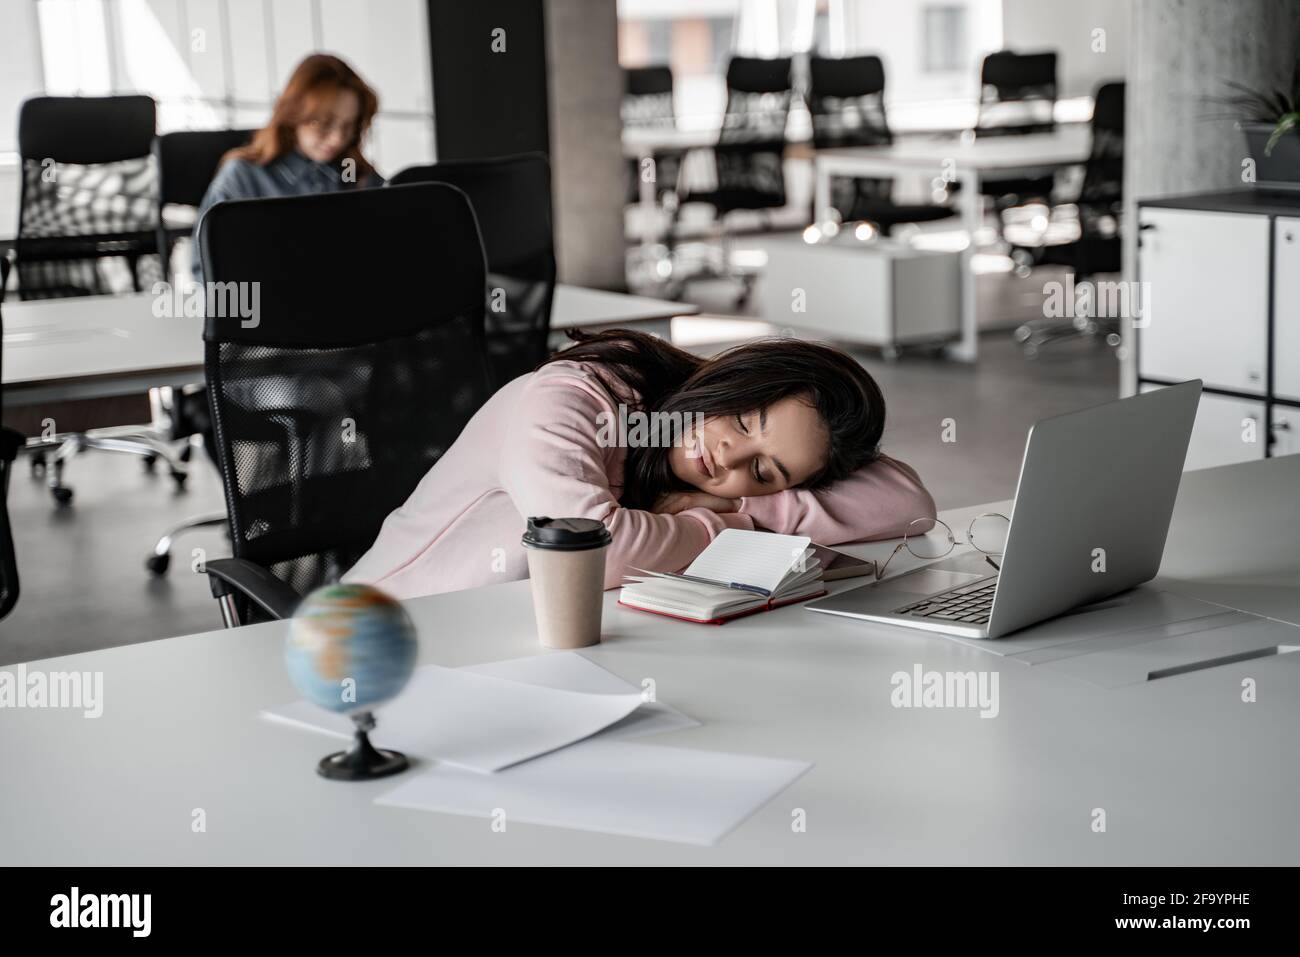 tired student sleeping on desk near laptop and paper cup Stock Photo